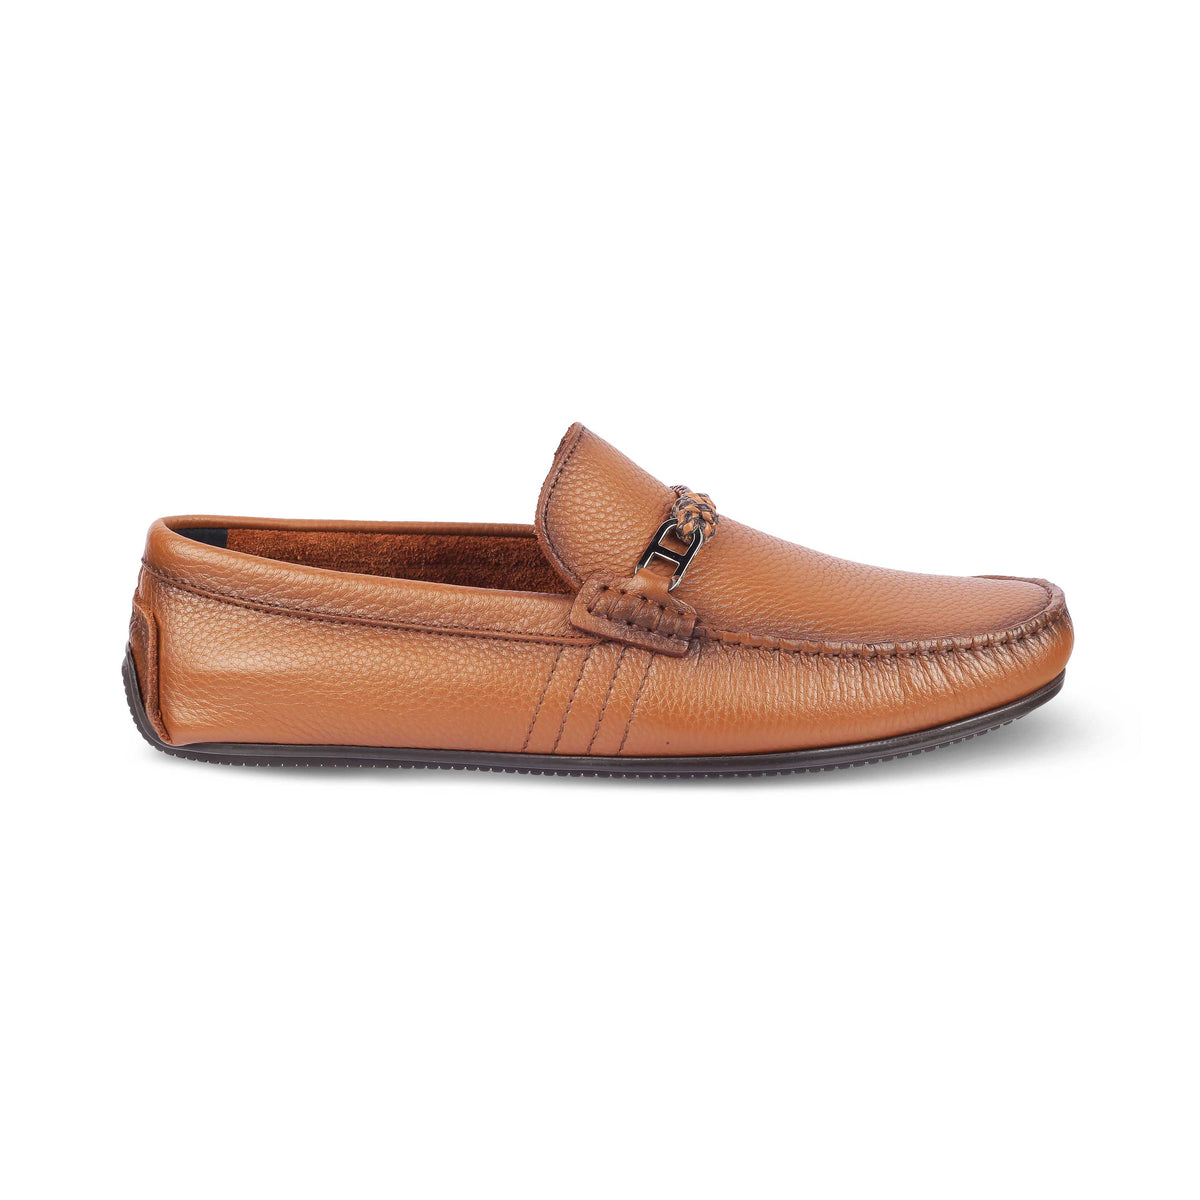 Tresmode Monoc Tan Men's Leather Driving Loafers - Tresmode